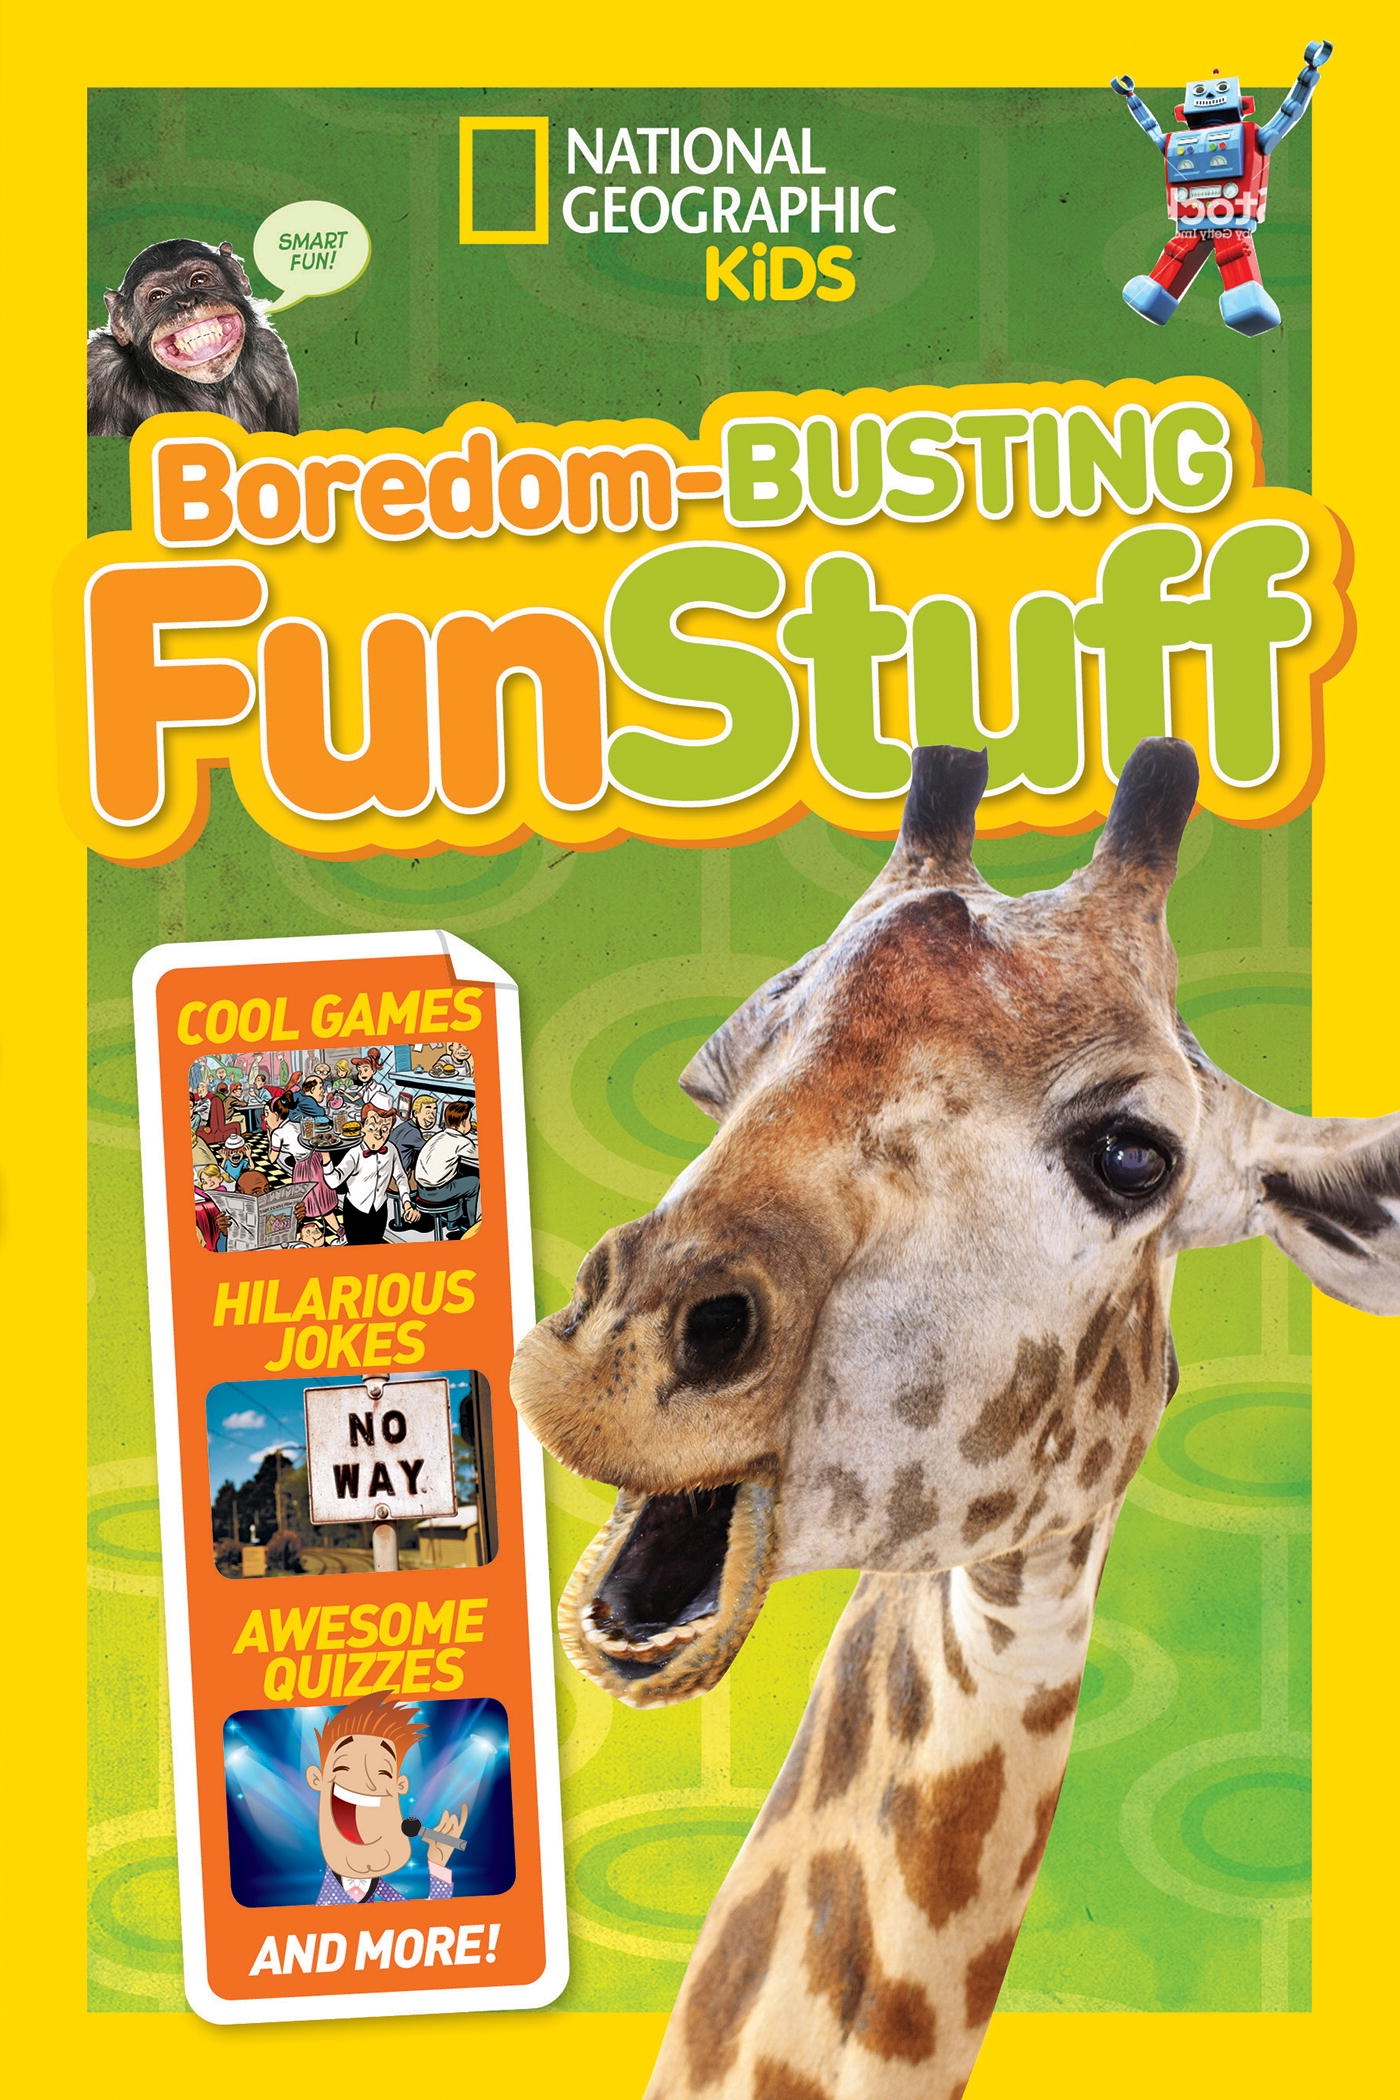 Boredom-Busting Fun Stuff by National Geographic, Kids - Penguin Books New Zealand